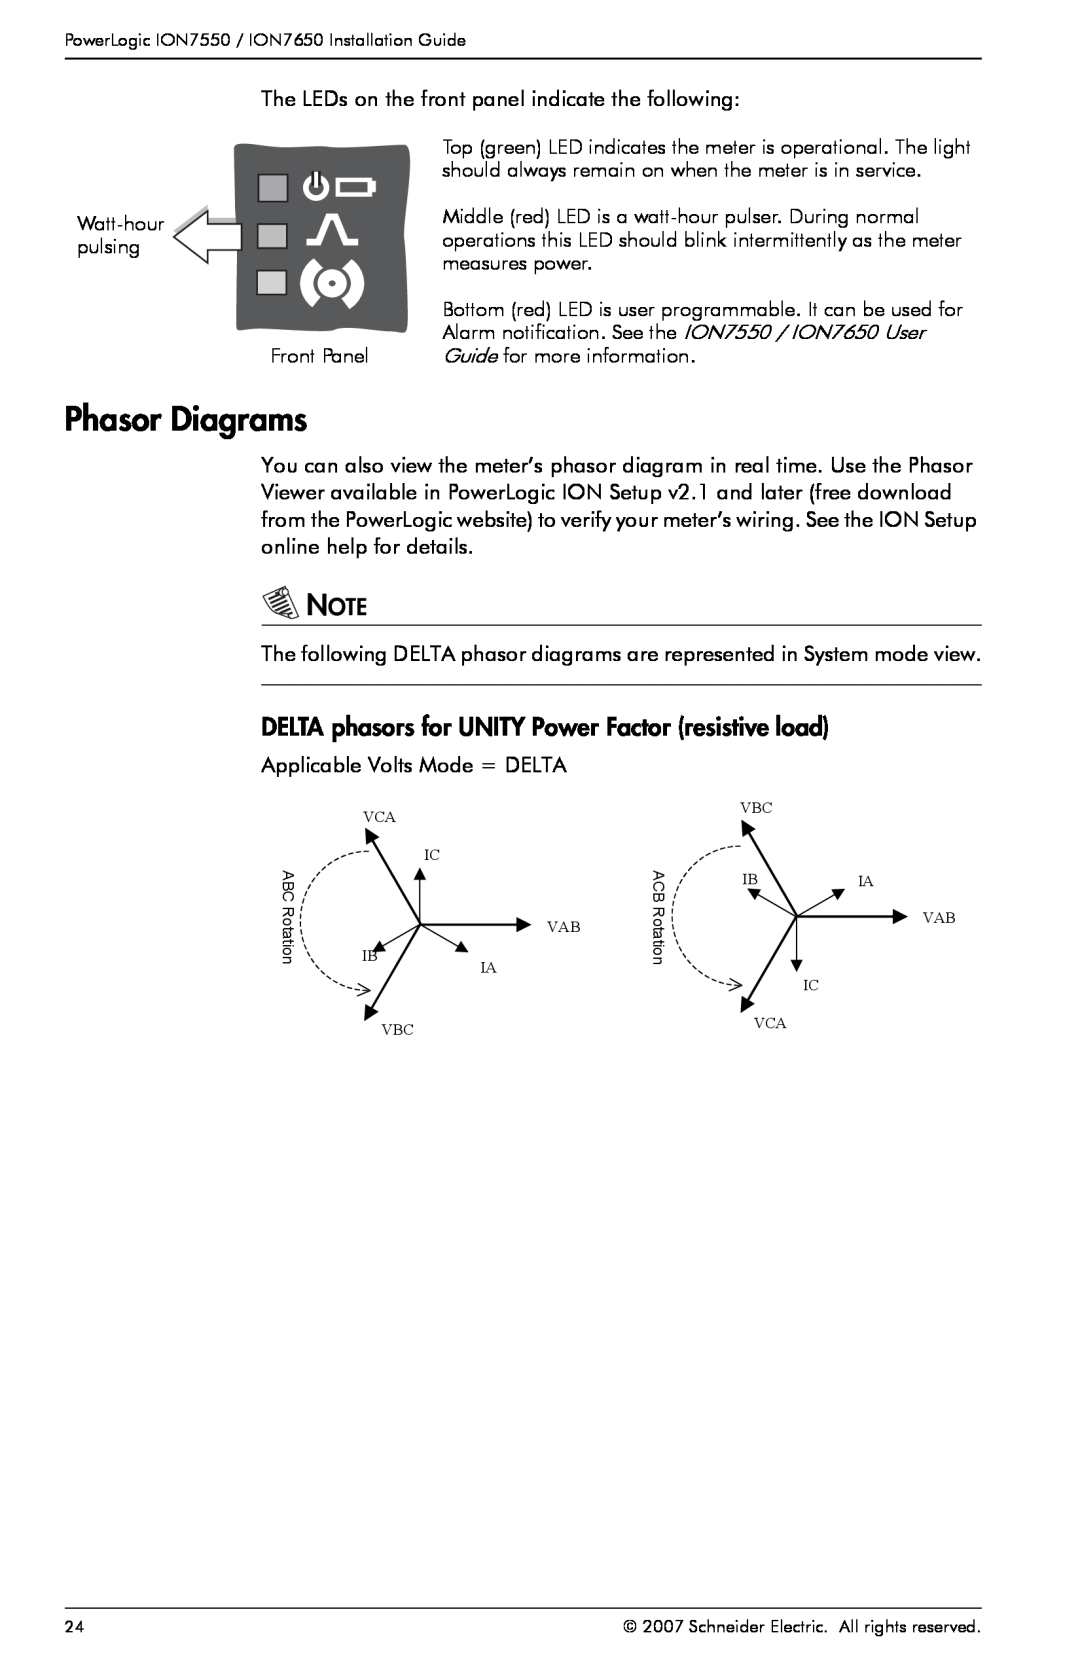 Schneider Electric ION7650, ION7550 manual Phasor Diagrams, DELTA phasors for UNITY Power Factor resistive load 